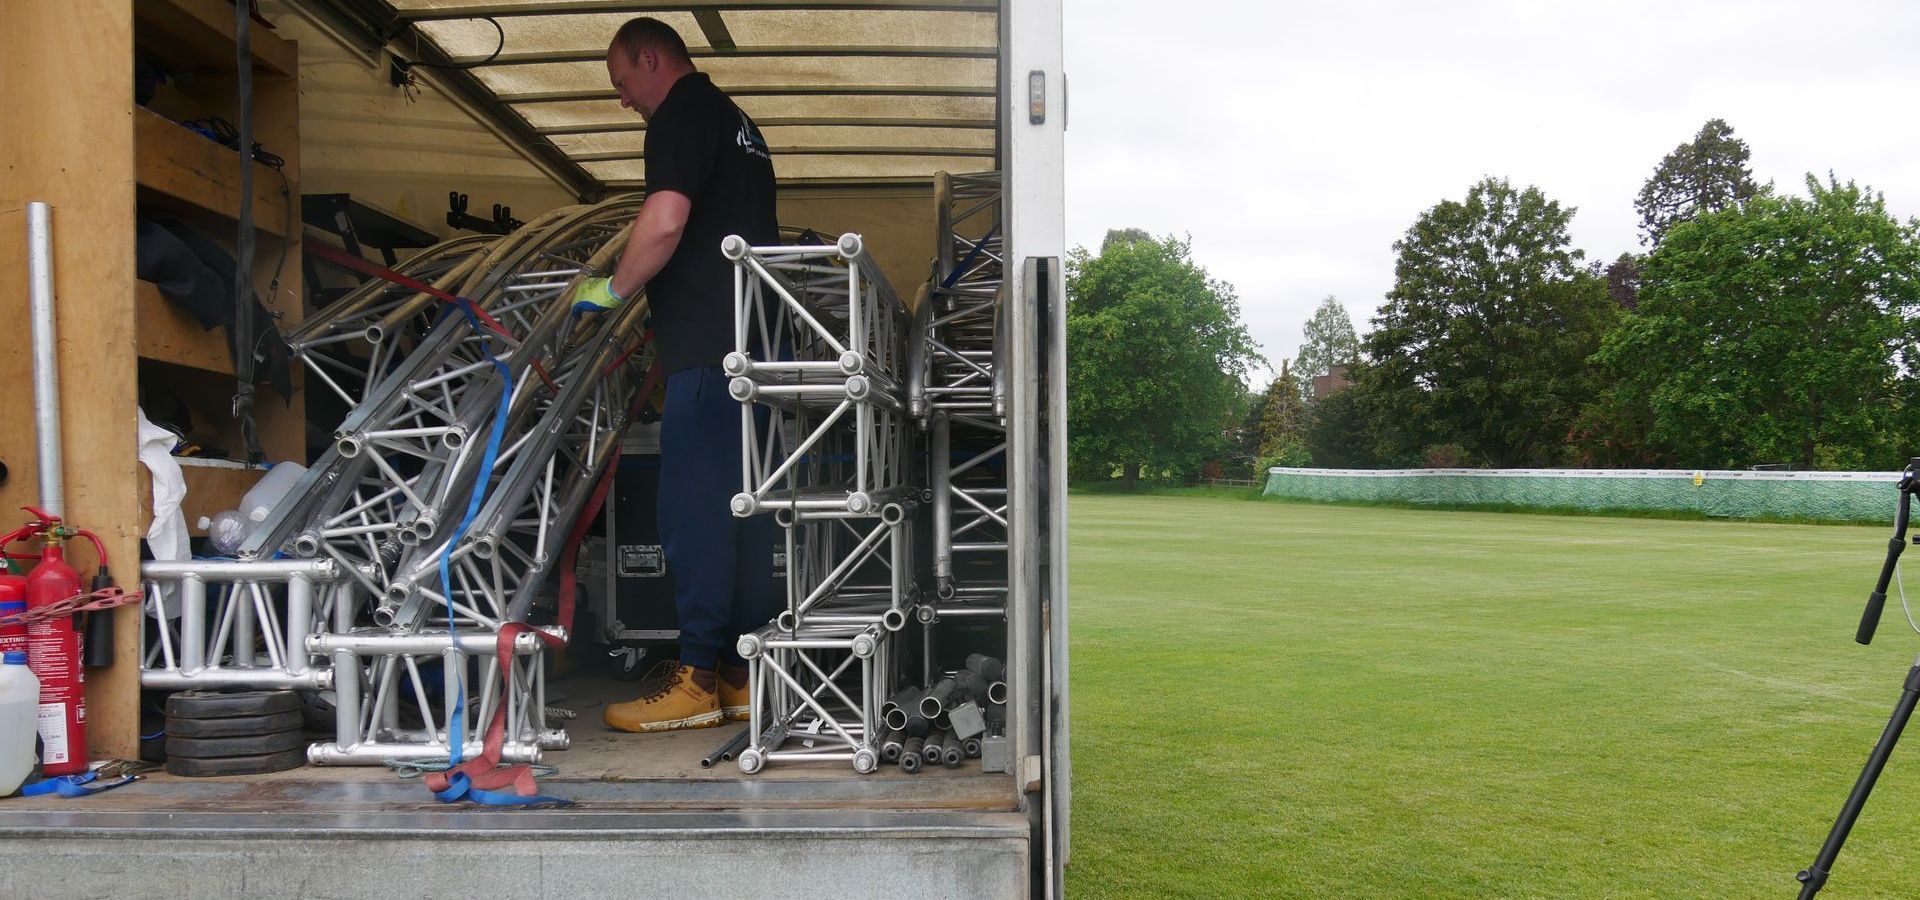 The back end of a lorry is open with stage pieces and equipment inside, a member of the crew is standing amongst it.